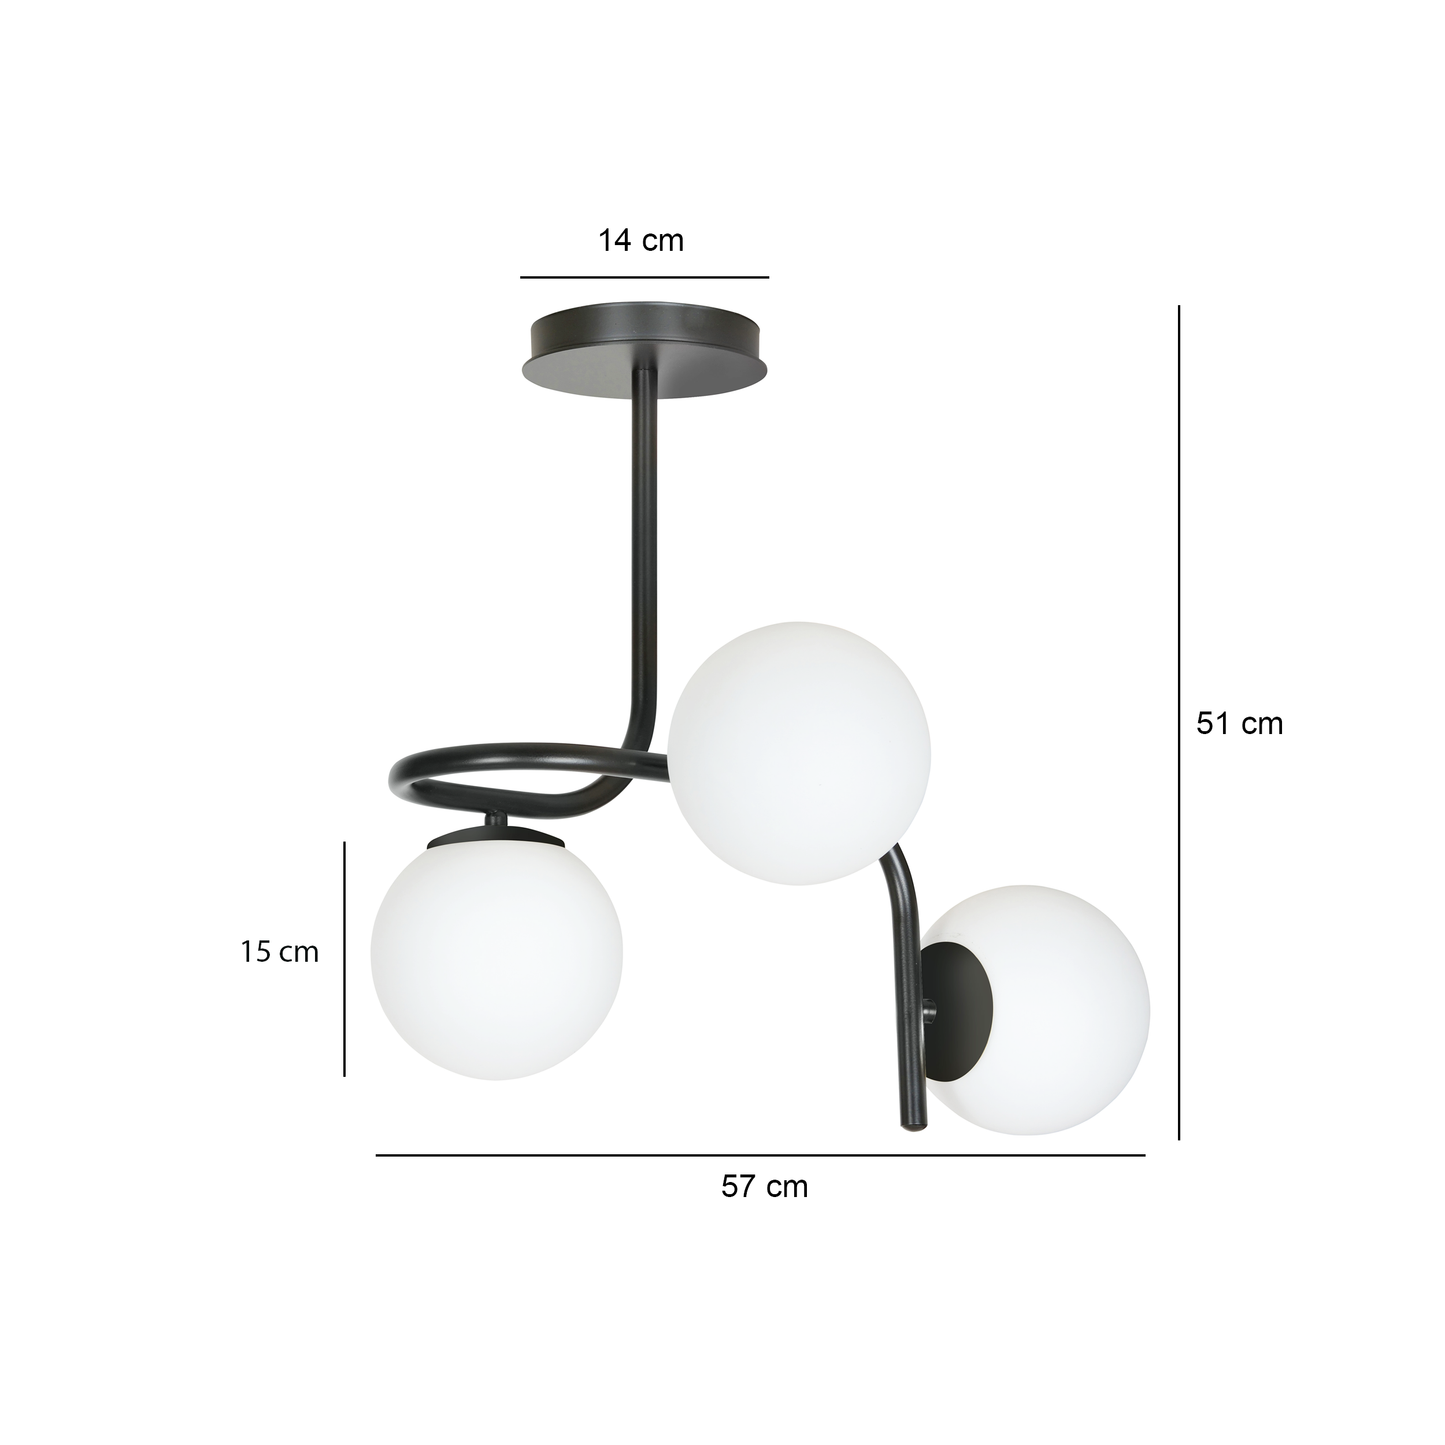 Kalf 3 is modern and contemporary in its design which is inspired by the industrial trend. The black powder coated arms are complimented by three round frosted glass globe shades creating a stand out feature for any living, dining or bedroom.